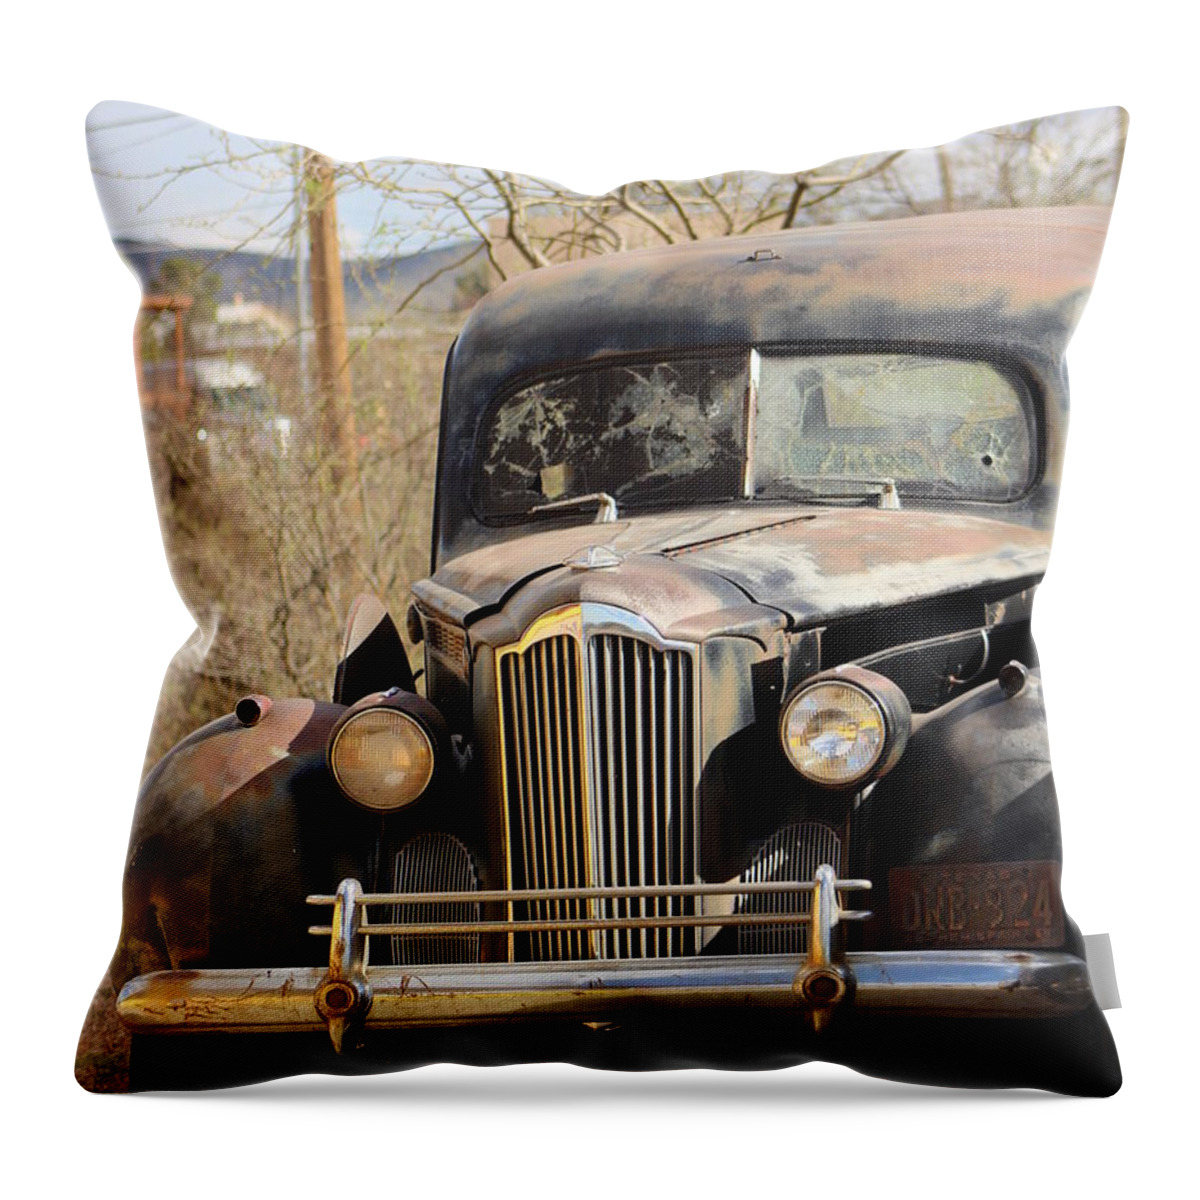 Old West Throw Pillow featuring the photograph Digger O Balls Funeral Pallor Hearse by Colleen Cornelius